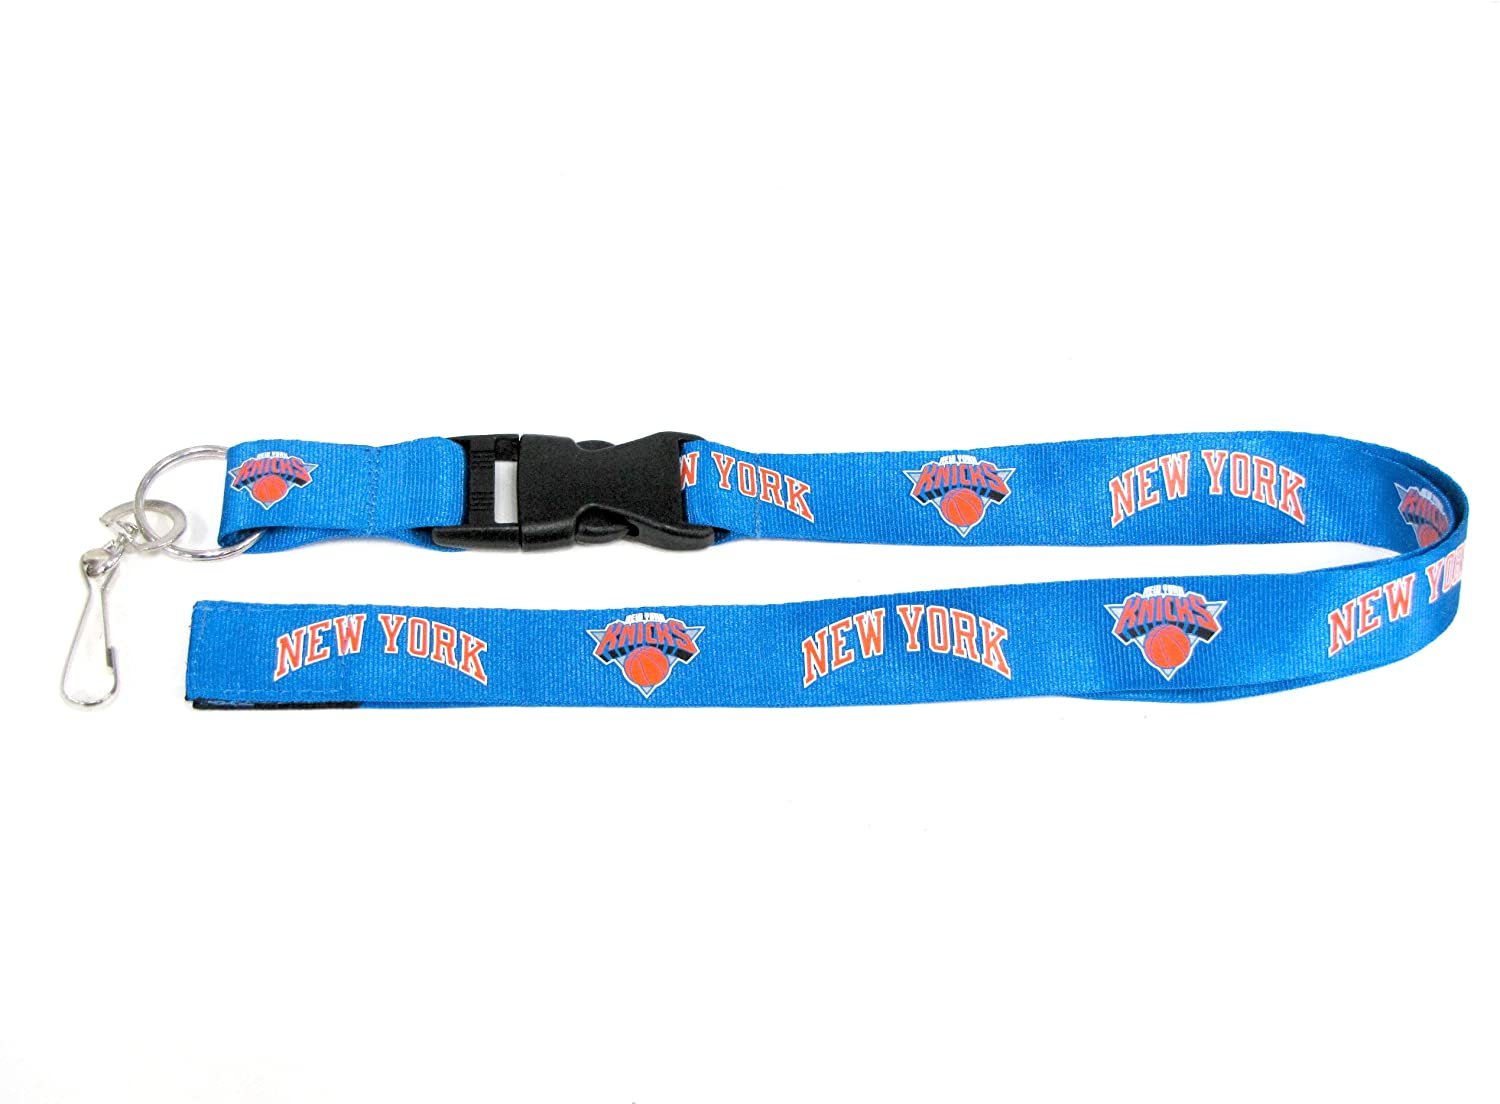 New York Knicks Lanyard Keychain Double Sided Breakaway Safety Design Adult 18 Inch